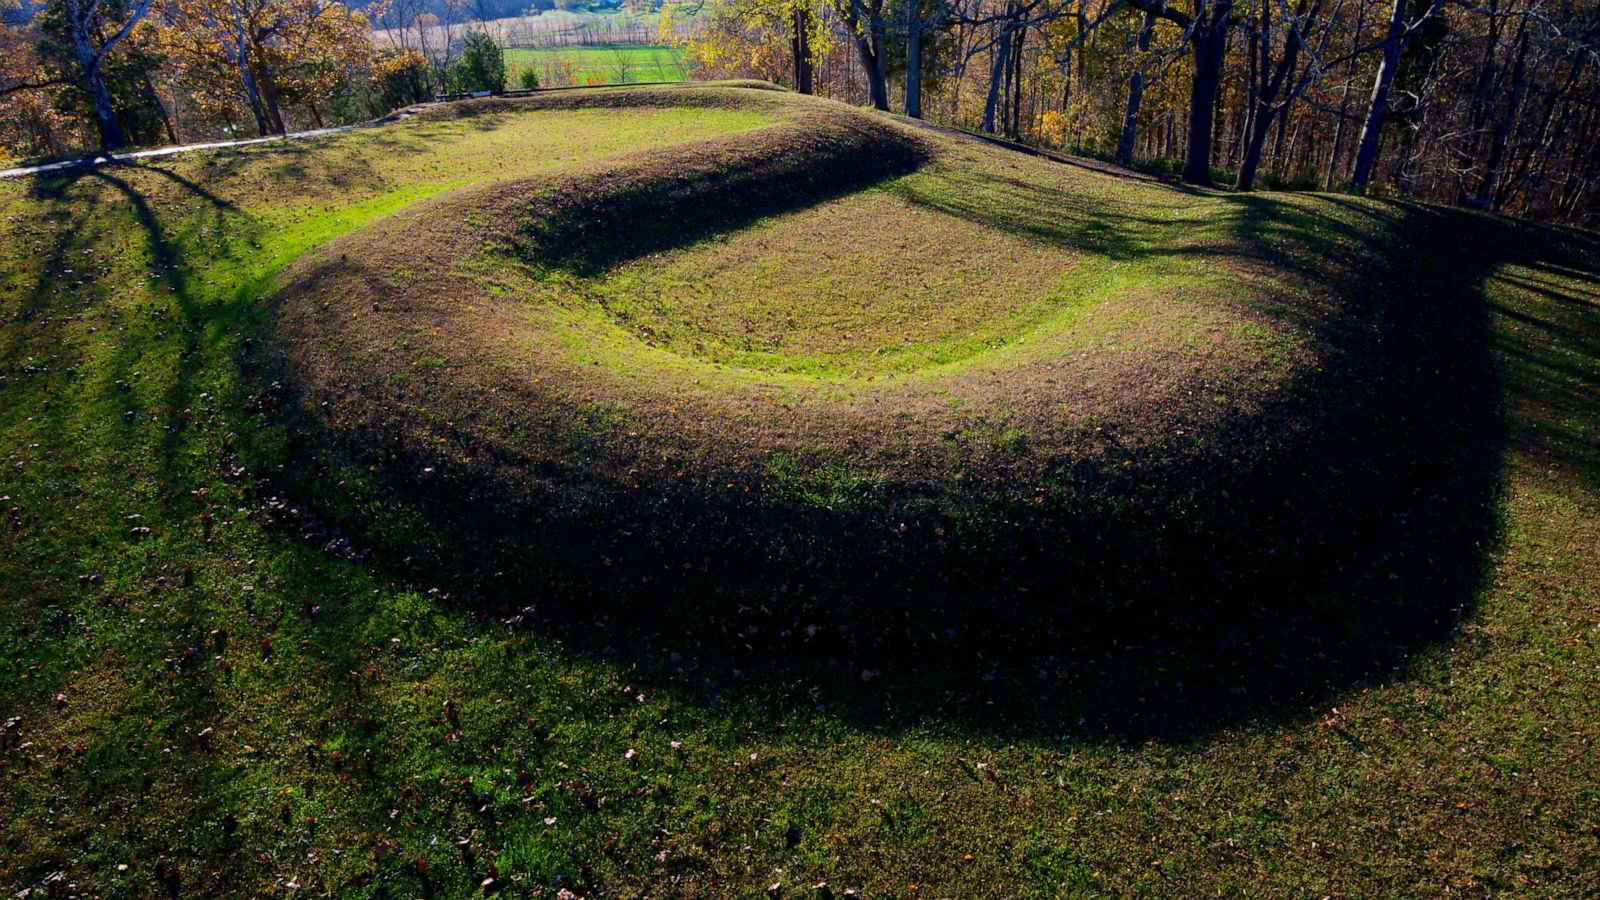 Serpent Mound, Ohio, continues to dazzle, inspire for the summer solstice